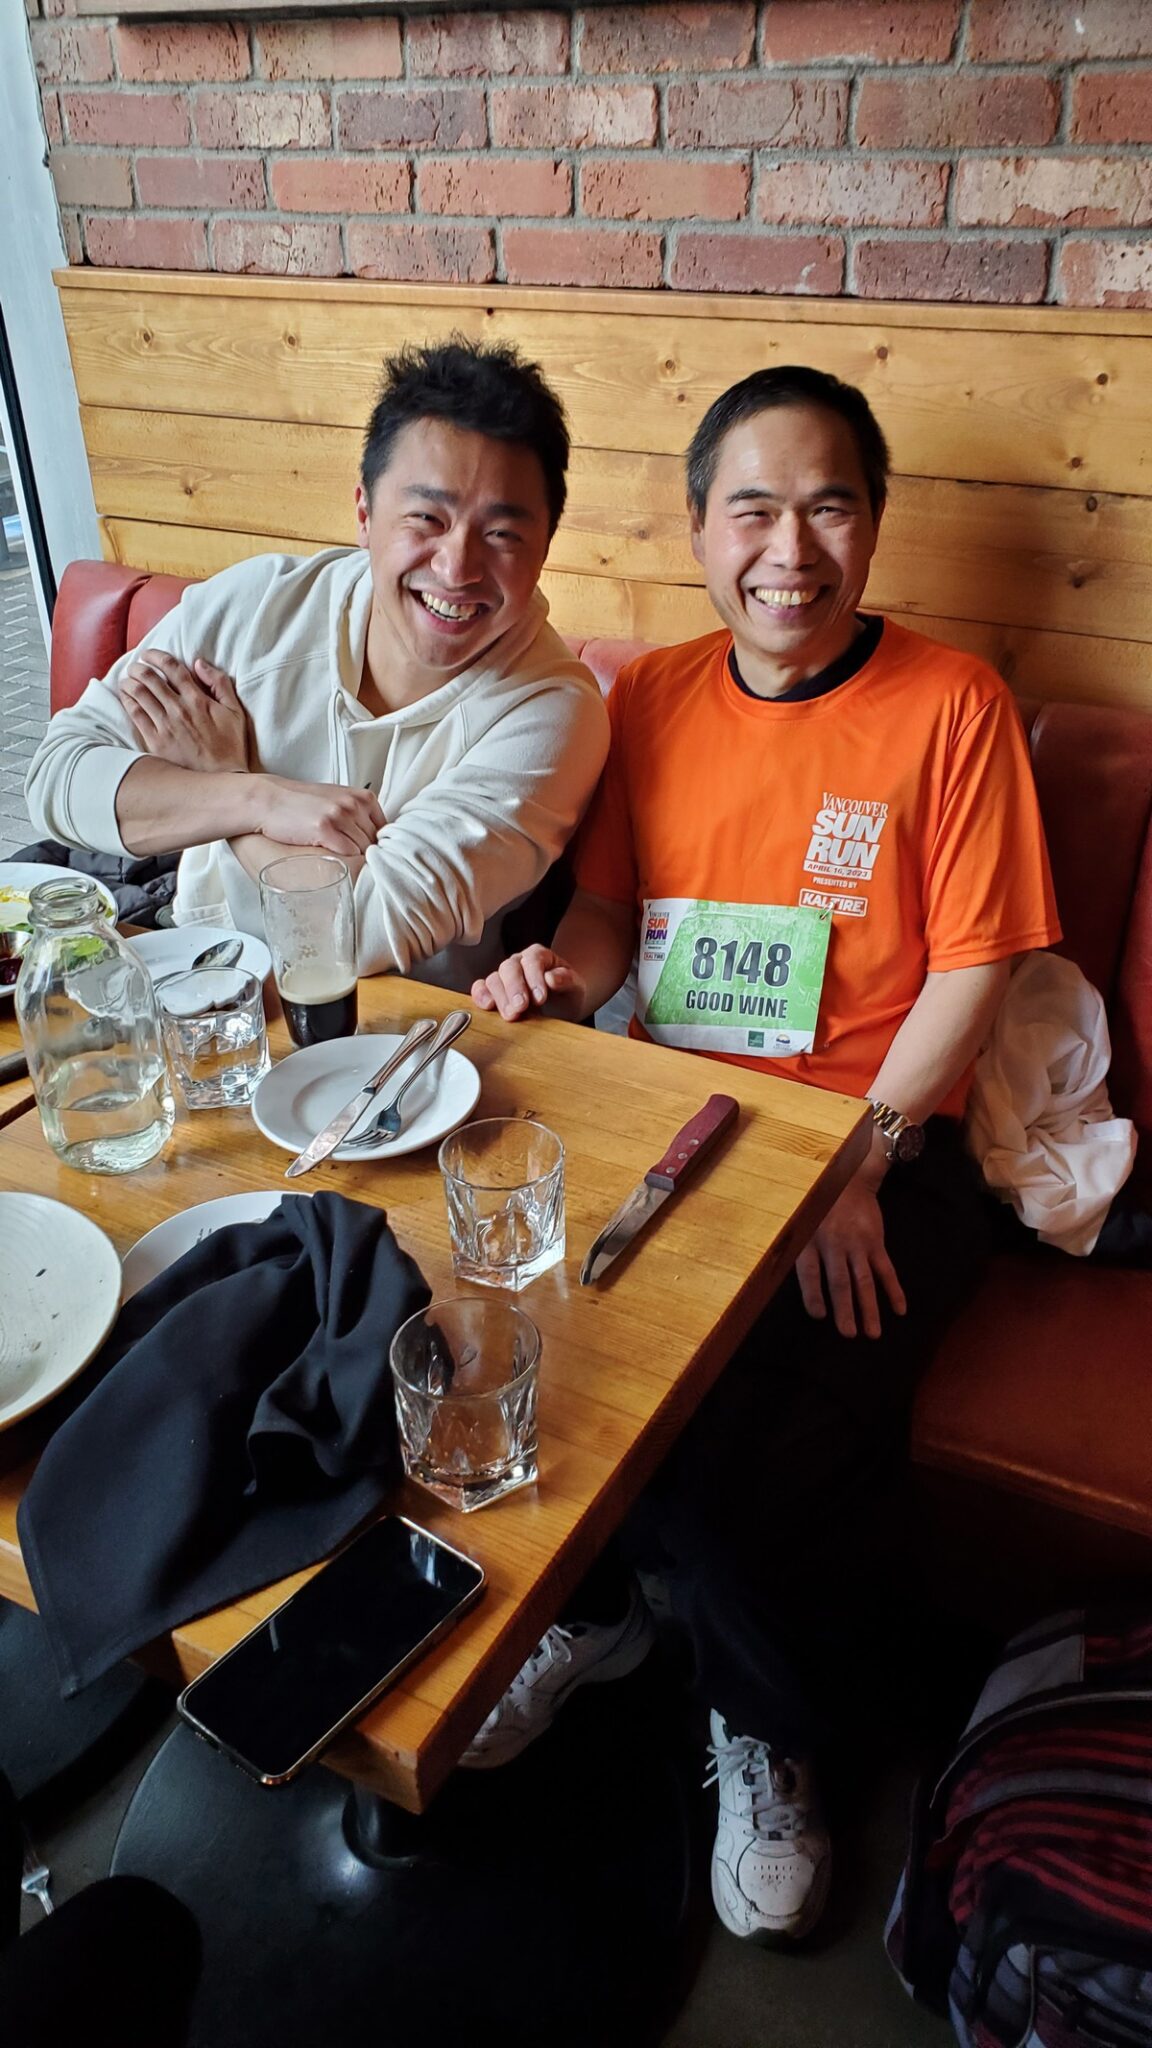 Marathon Participants Enjoying Food and Drinks at Vancouver's The Flying Pig